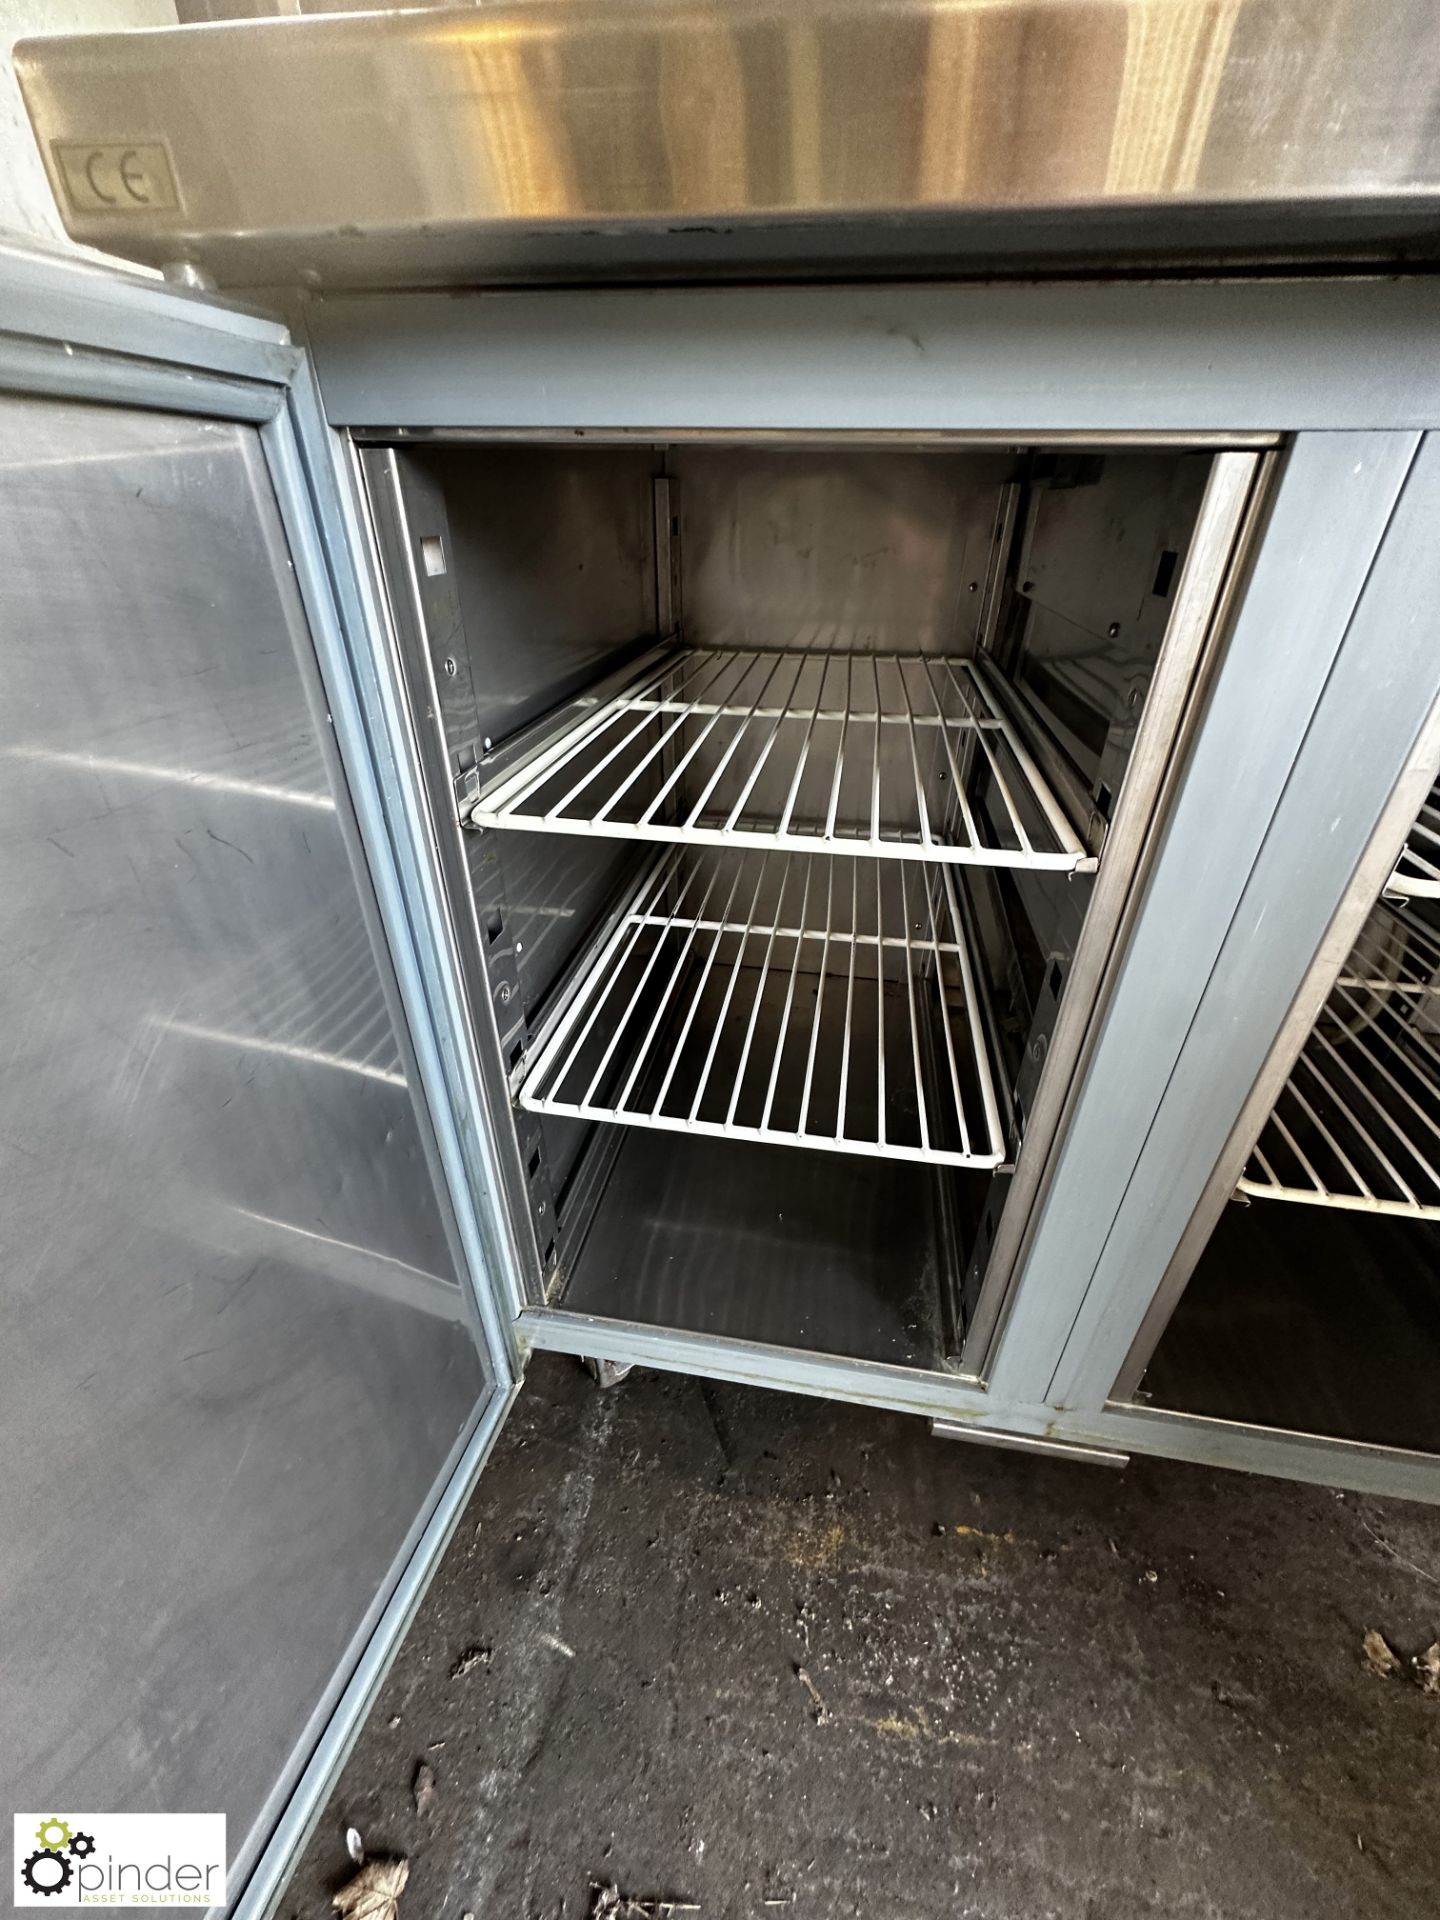 Stainless steel mobile 3-door Refrigerated Counter, 1880mm x 700mm x 860mm - Image 3 of 8